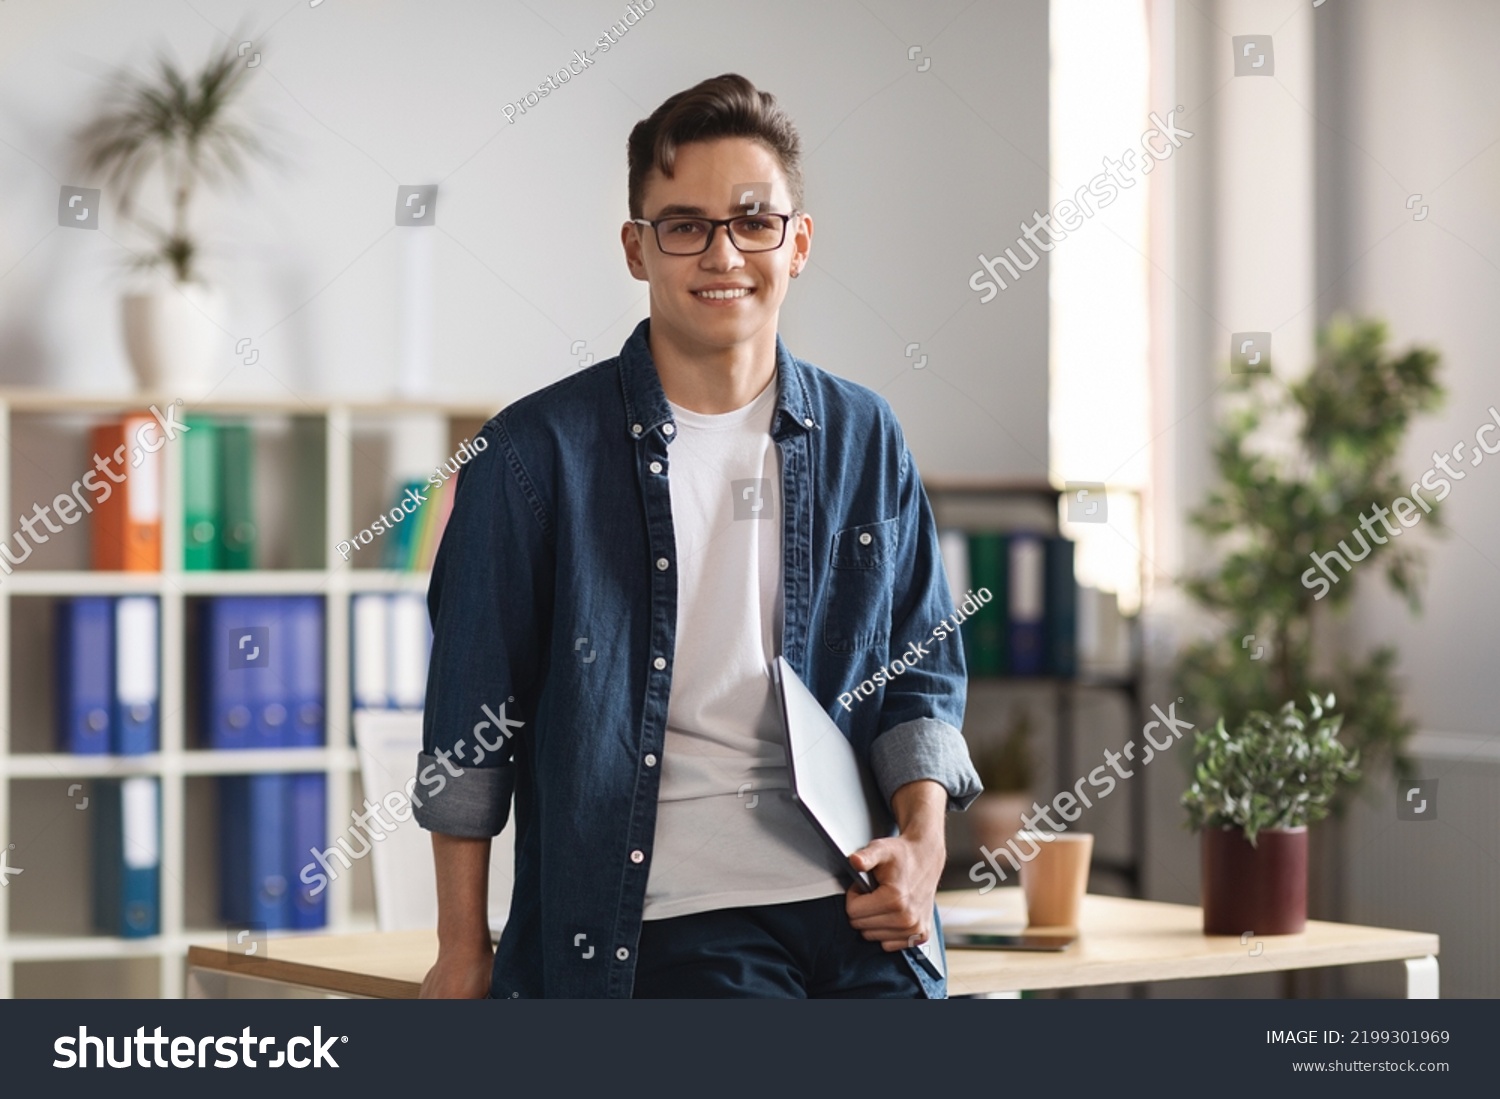 Portrait Of Handsome Young Male Entrepreneur Holding Laptop And Posing In Office Interior, Confident Millennial Man In Casual Clothes Standing Near Desk And Smiling At Camera, Copy Space #2199301969